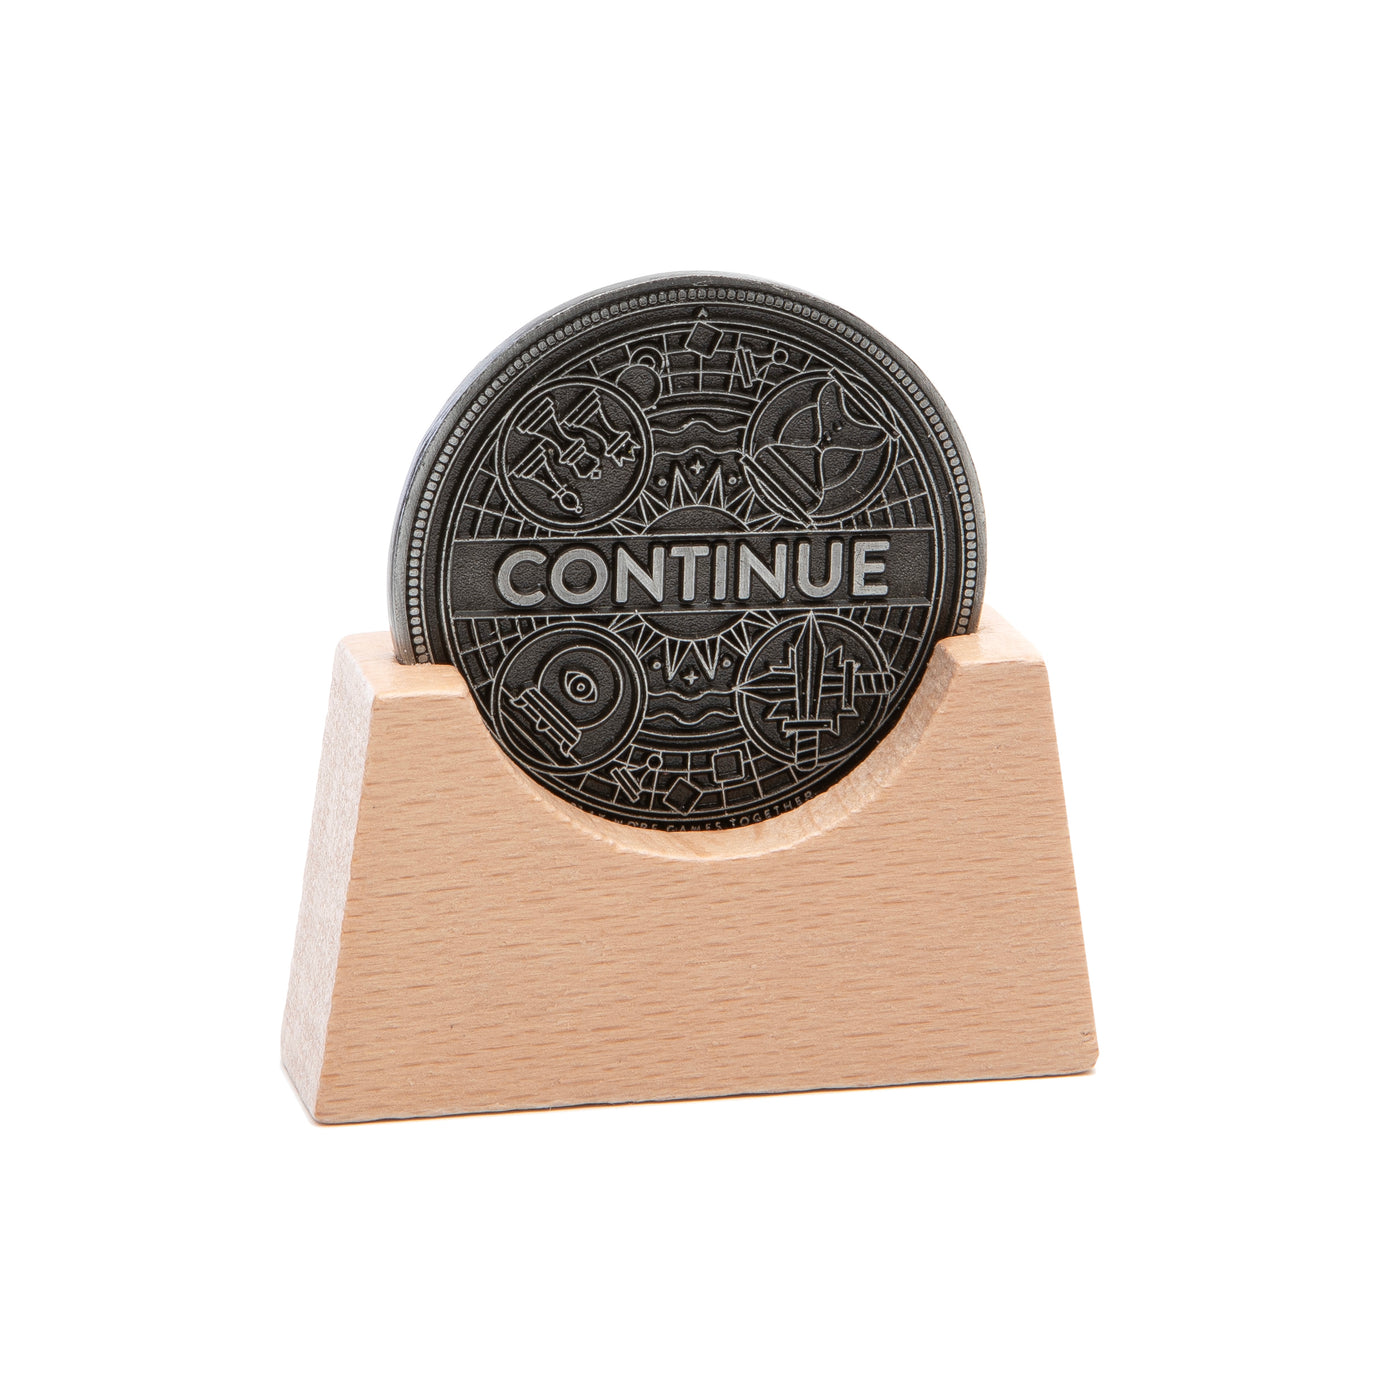 Game Over Coin displaying "Continue" in display stand